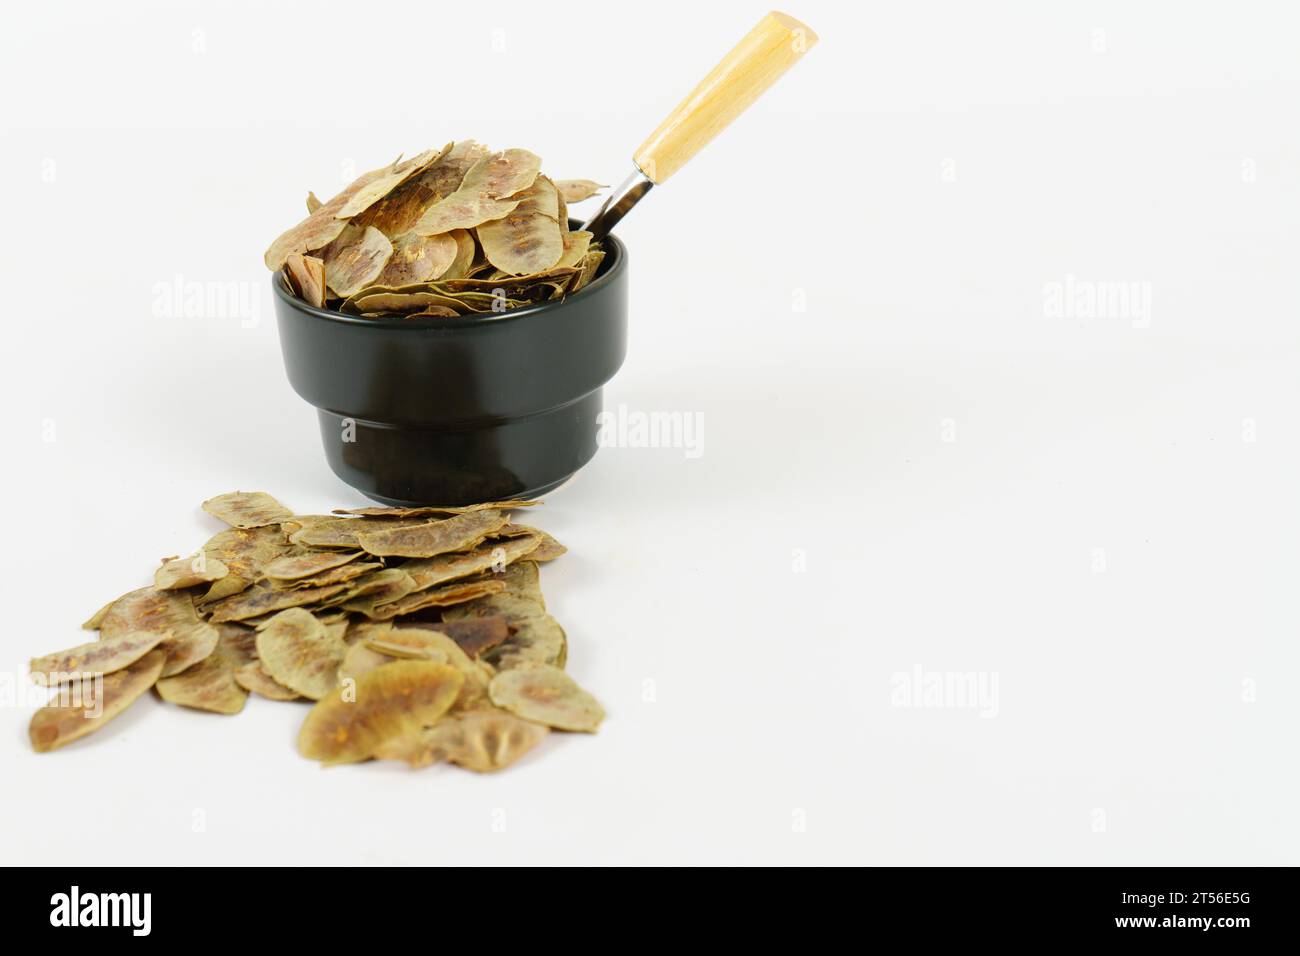 Senna alexandrina pods. Cassia senna, with depurative and detoxifying properties in a black ceramic bowl with a metal and wooden spoon, isolated on a Stock Photo